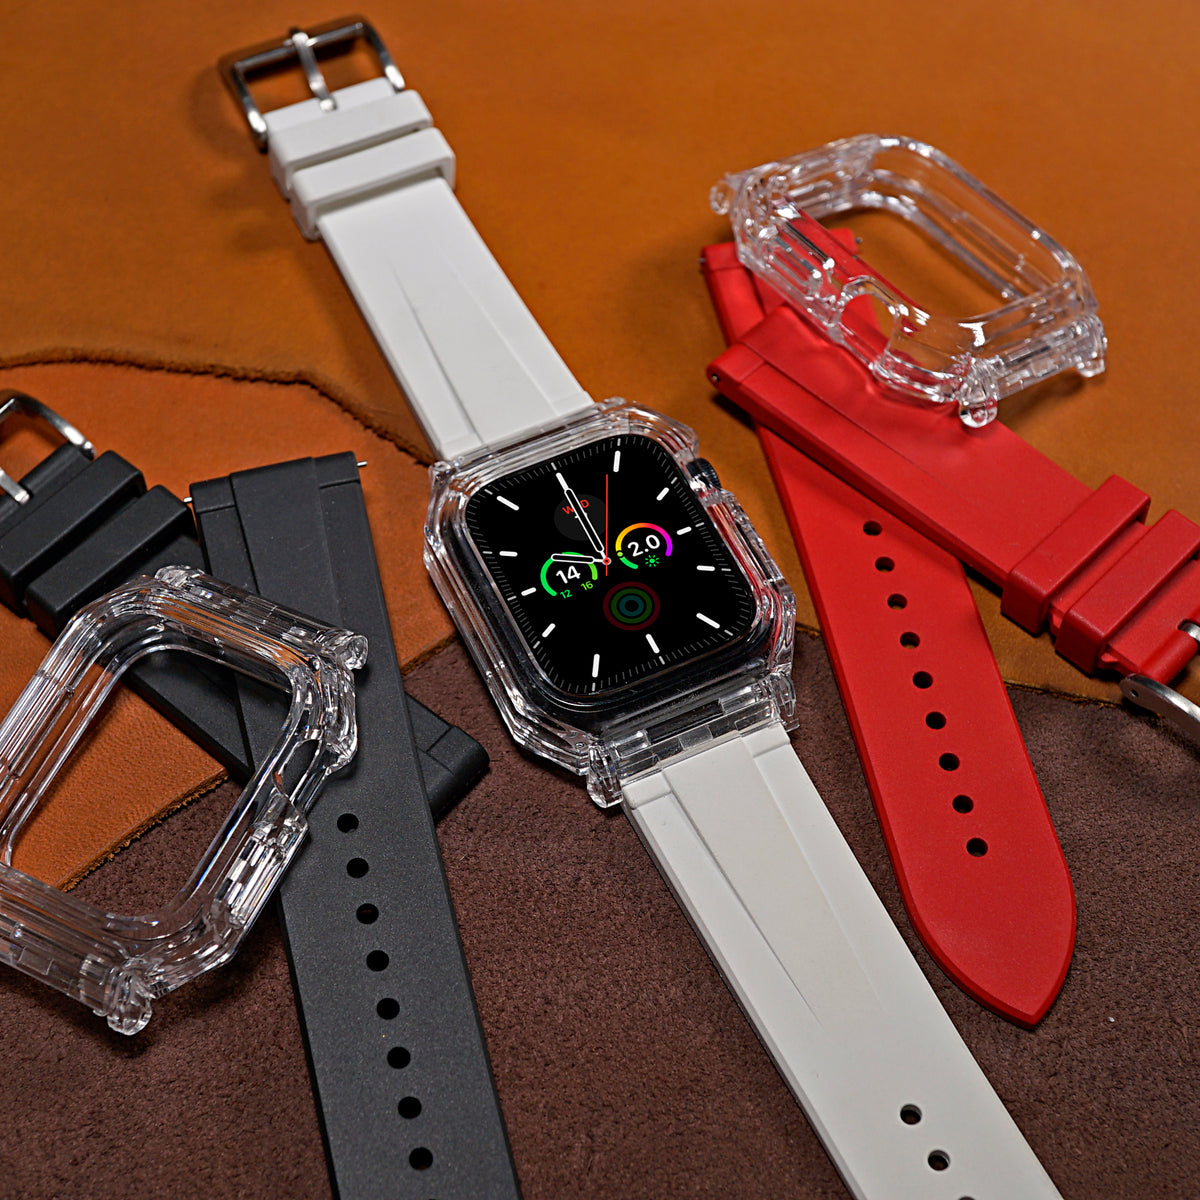 Apple Watch Rubber Mod Kit in White - Nomad Watch Works SG